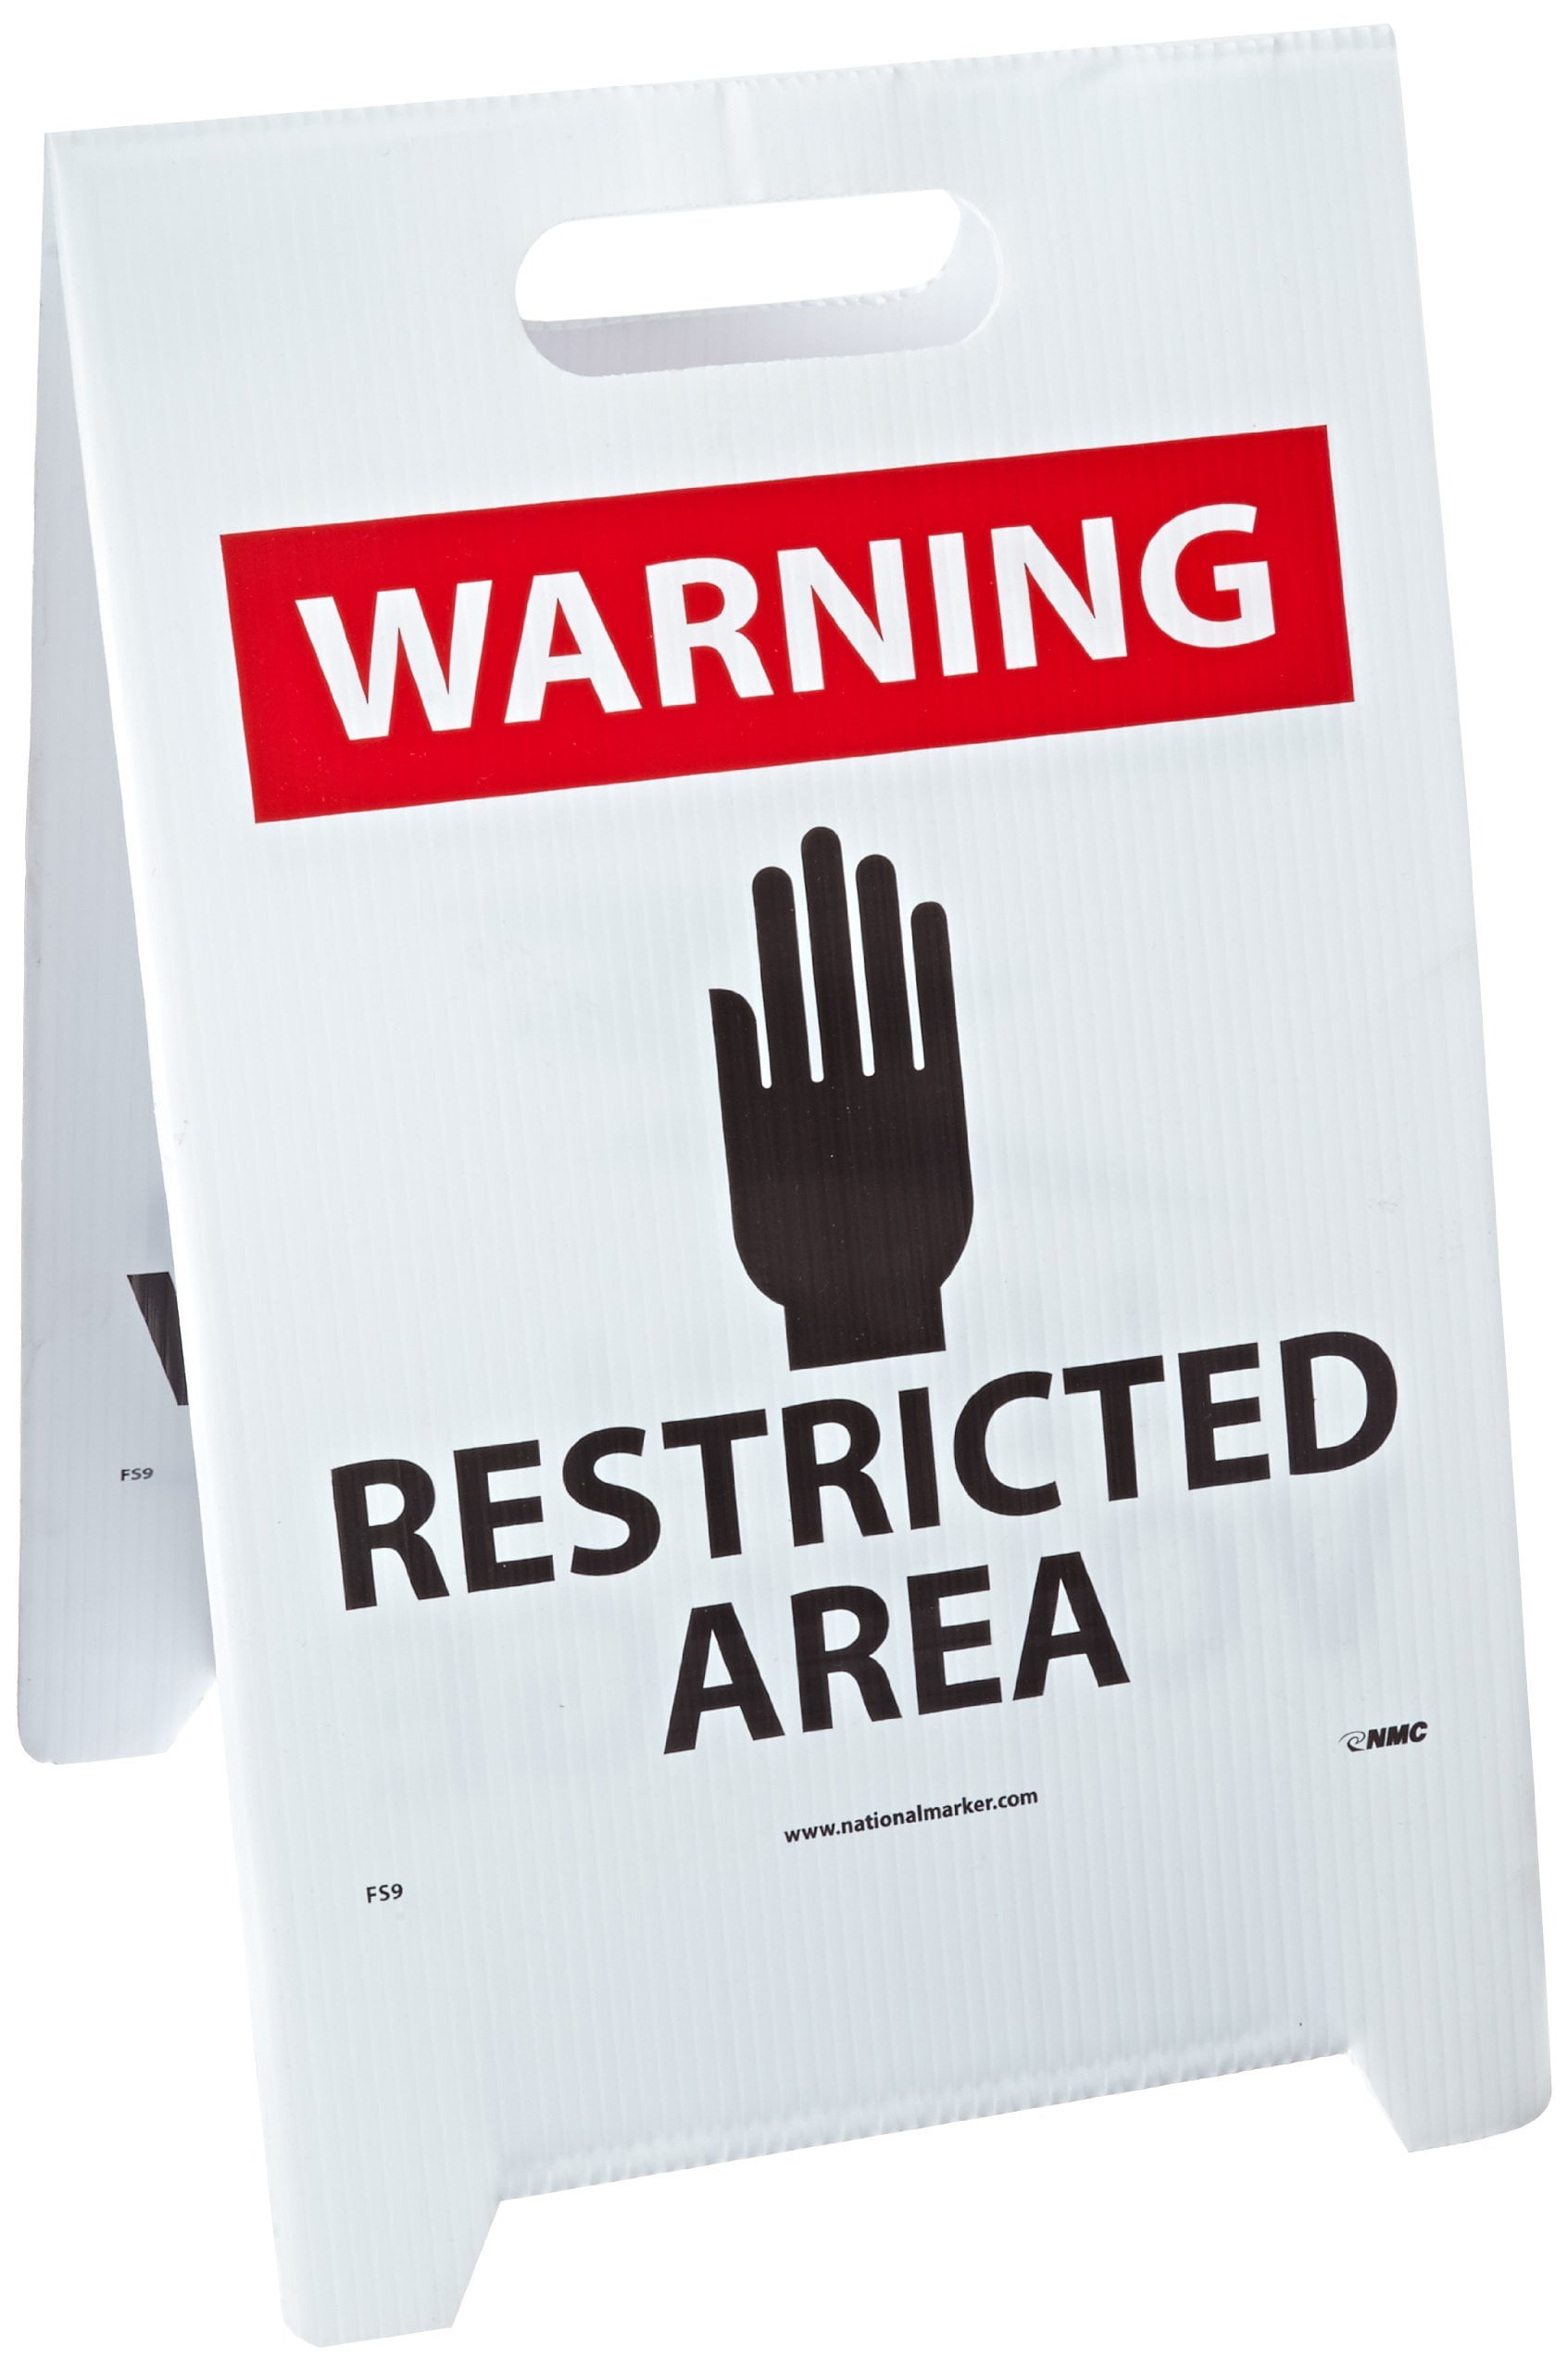 12 Length x 20 Height Coroplast HIGH VOLTAGE WARNING RESTRICTED AREA with Graphic Black on White Legend DANGER NMC FS9 Double Sided Floor Sign 